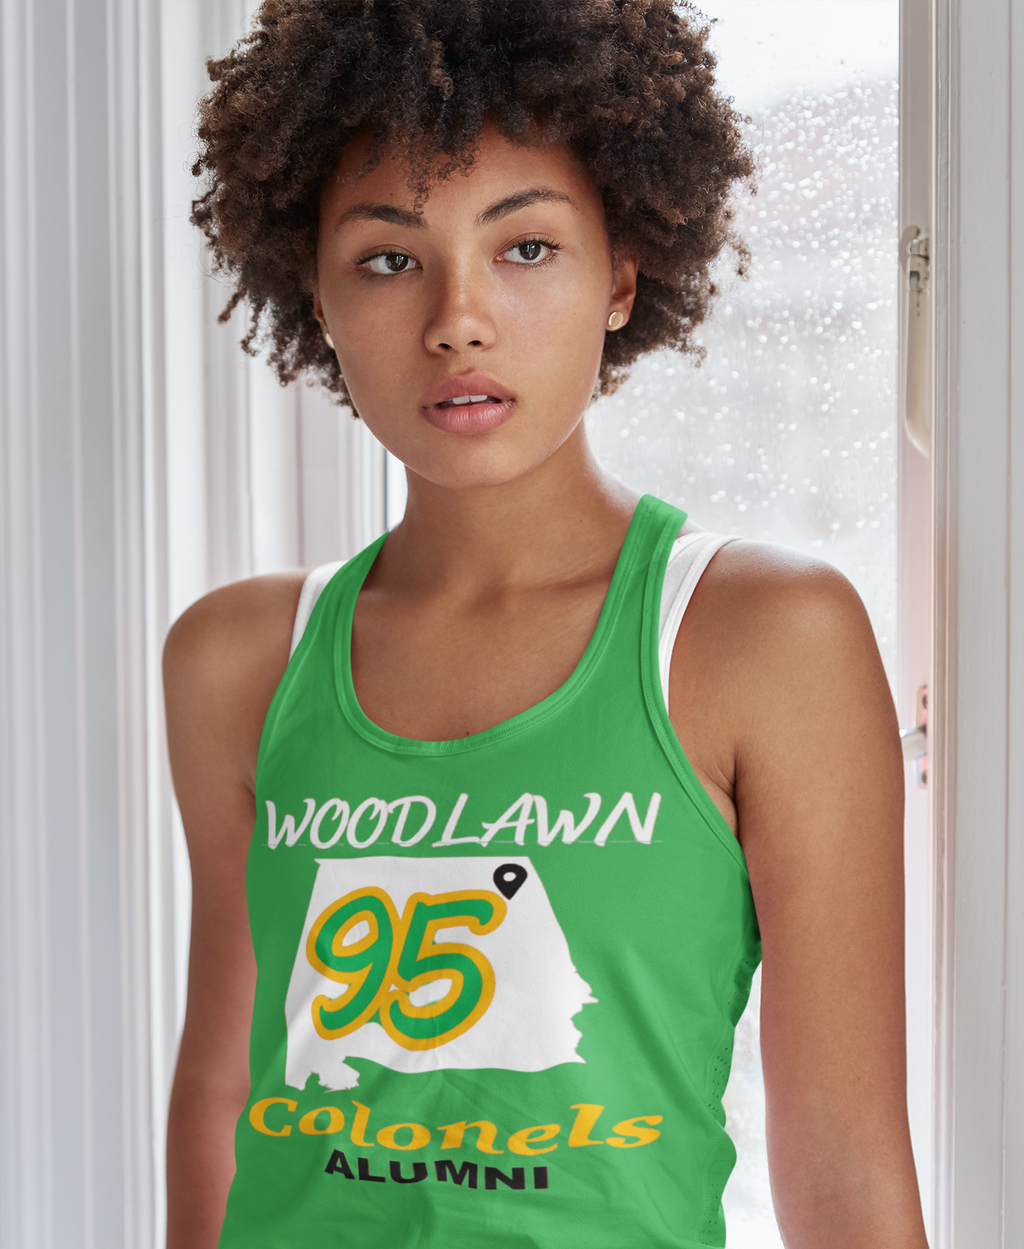 Woodlawn Colonels Racer Tank